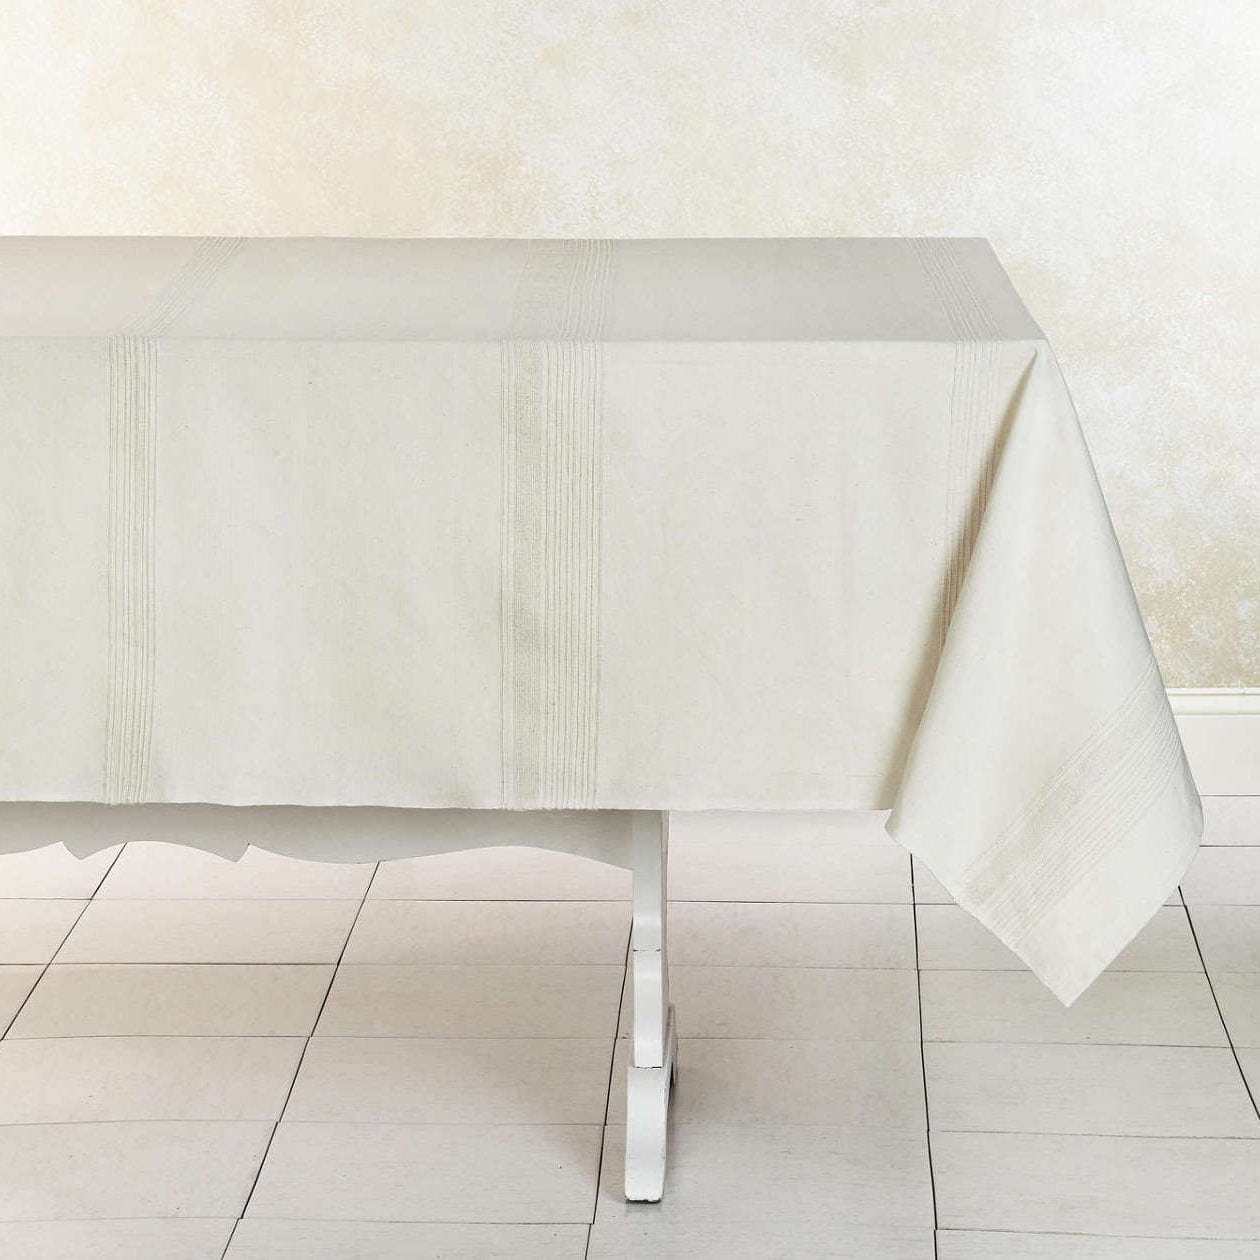 Sustainable Threads 100% Cotton Tablecloth – Cream – 70" x 108"